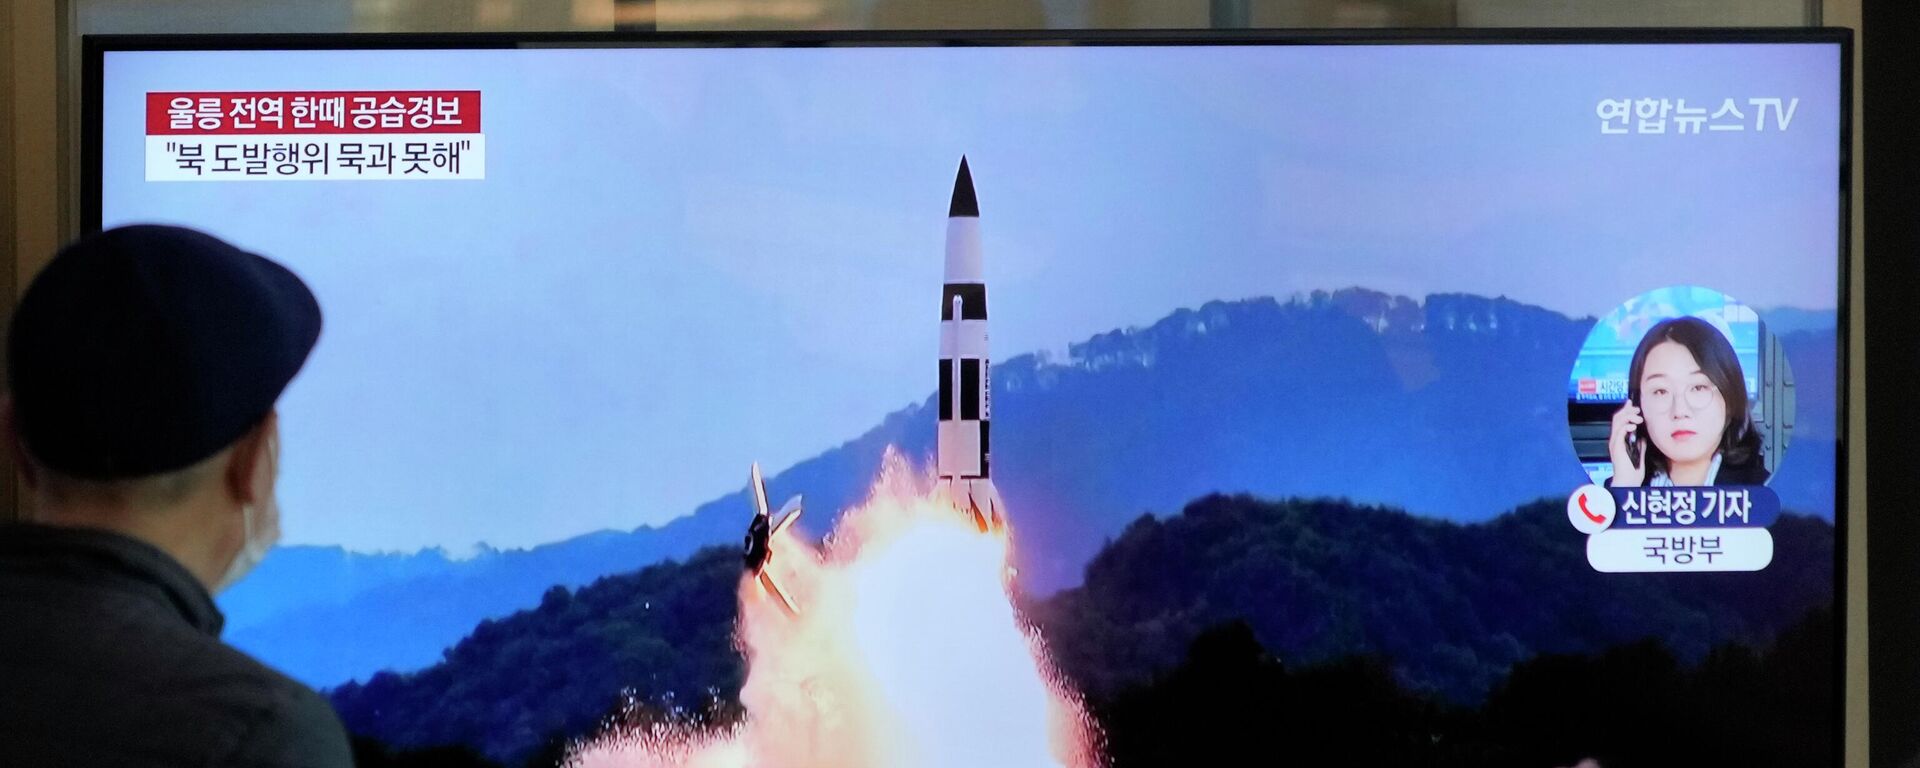 A TV screen shows a file image of North Korea's missile launch during a news program at the Seoul Railway Station in Seoul, South Korea, Wednesday, Nov. 2, 2022. South Korea says it has issued an air raid alert for residents on an island off its eastern coast after North Korea fired a few missiles toward the sea - Sputnik International, 1920, 30.12.2022